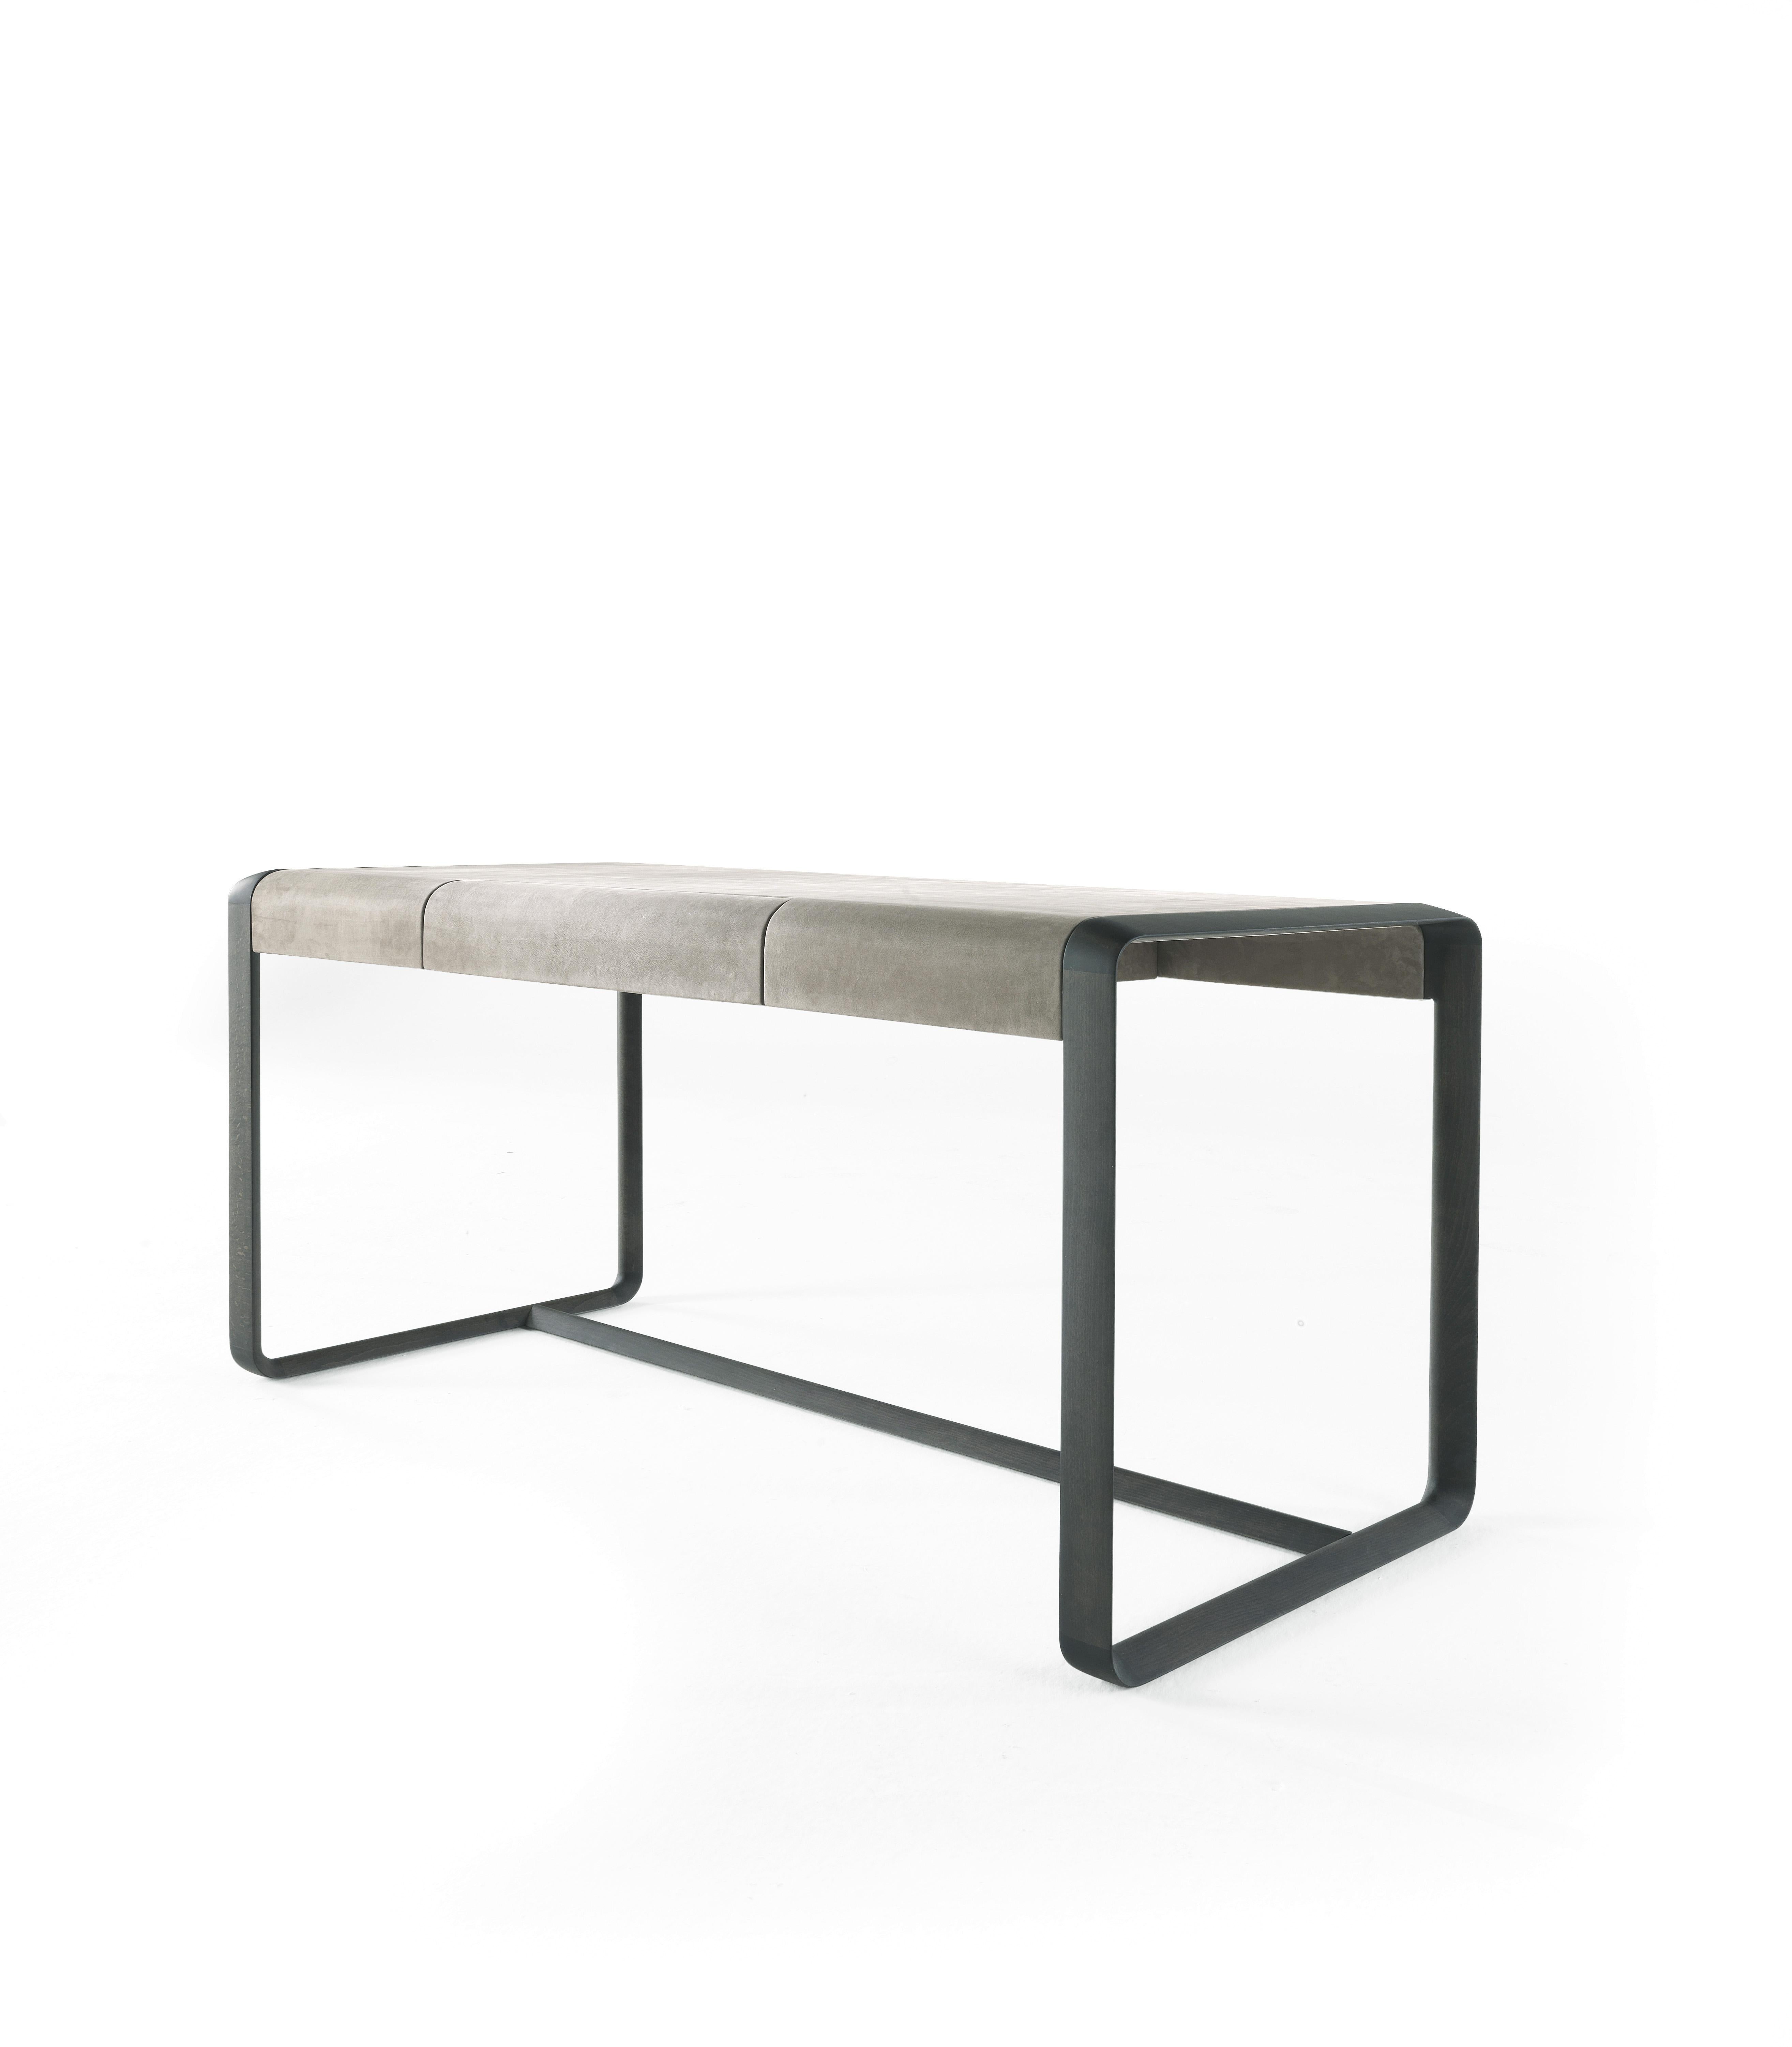 Elegant and functional, the Wynwood desk fascinates the viewer with its essential lines and refined charm. Made of solid beech wood dyed Smokey Grey, the desk is upholstered in soft nubuck for a comfortable and welcoming effect, while the slightly